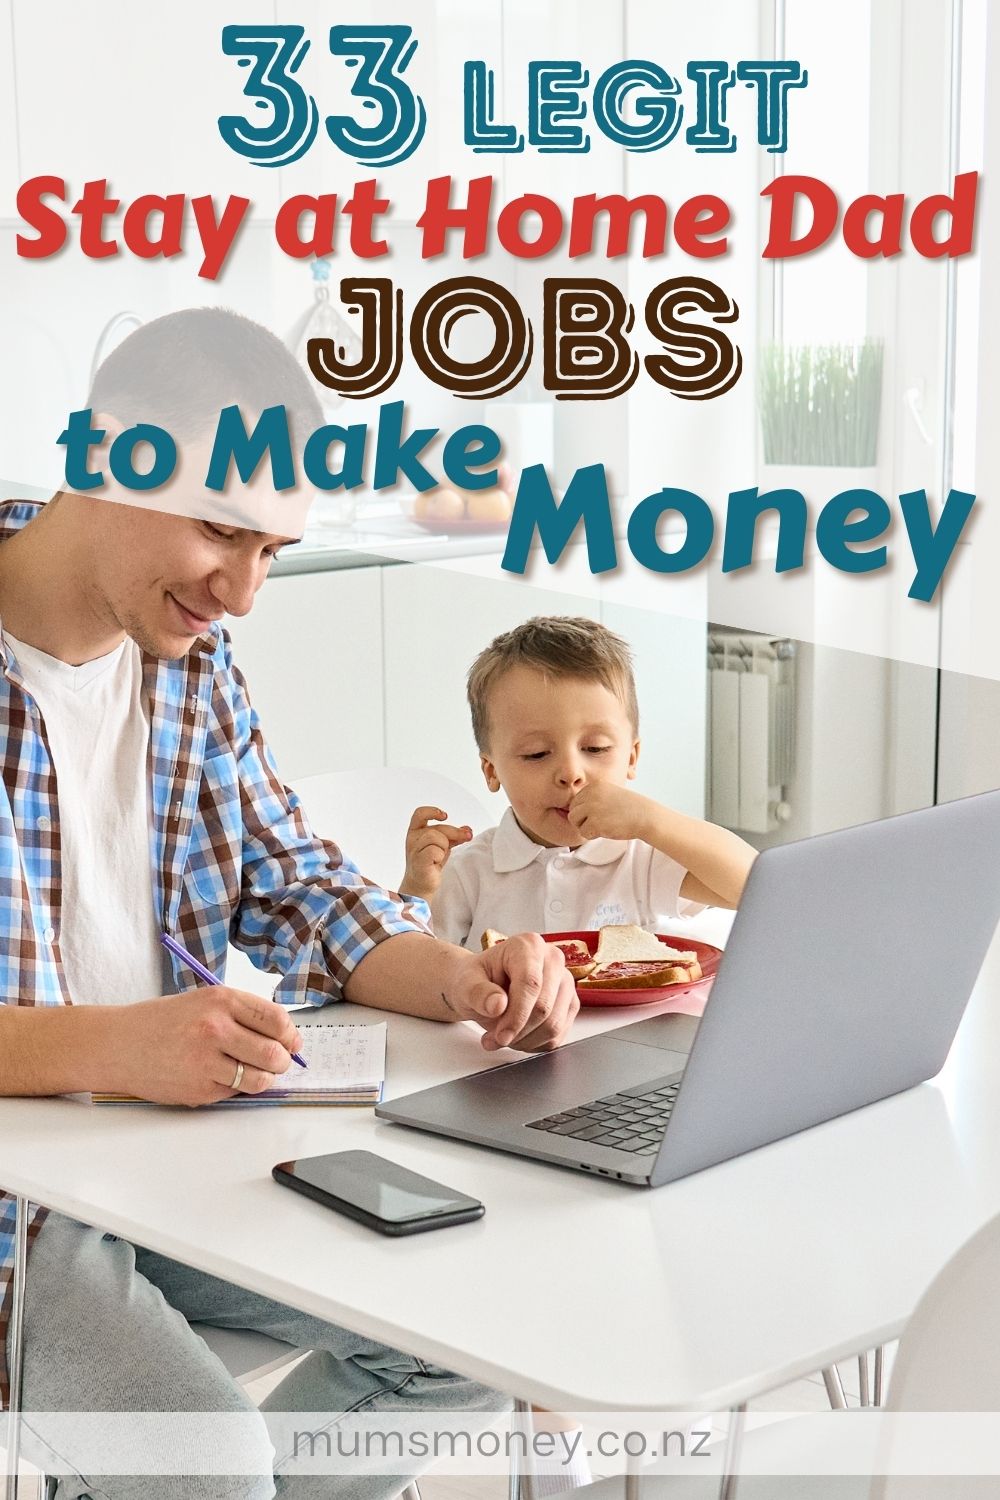  Legit Stay at Home Dad Jobs to Make Money Pin Image